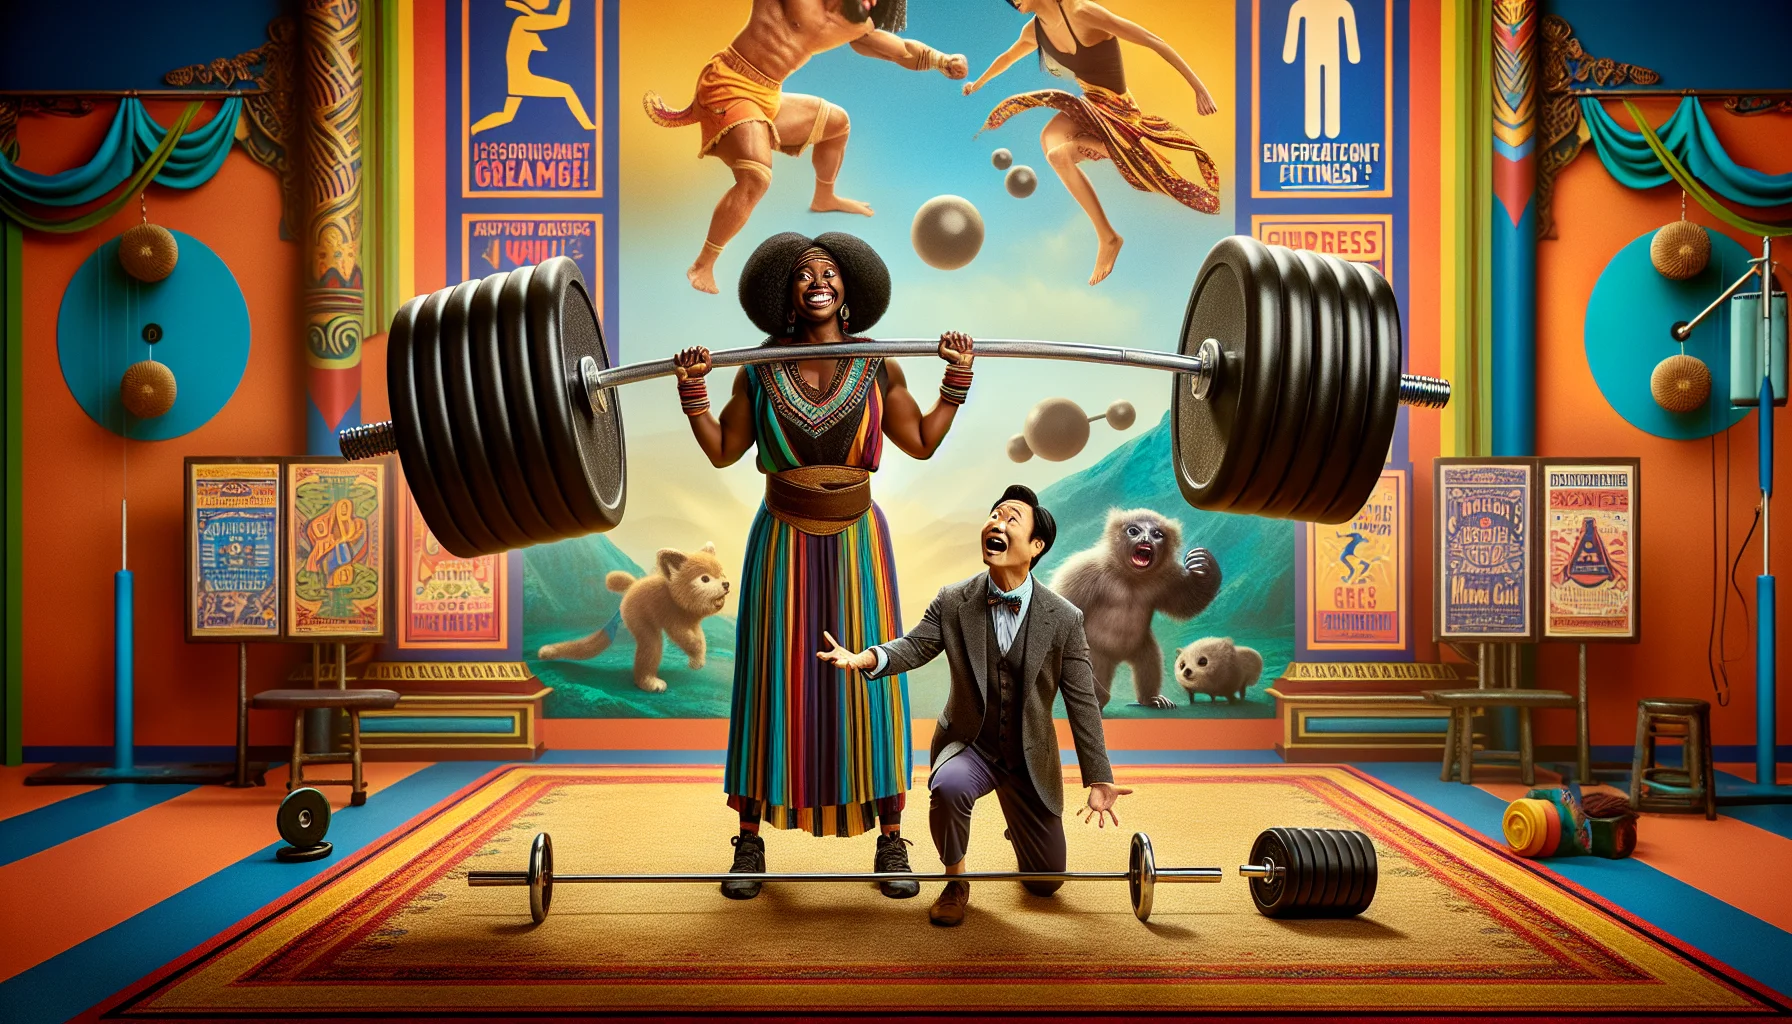 Craft a humorous and realistic image illustrating the act of powerlifting, designed to inspire viewers to exercise. In the frame, imagine a Black woman lifting an enormous barbell with oversized, comedic weights. Meanwhile, an Asian man appears completely astonished by her strength as he struggles with a tiny featherweight dumbbell. Background is set in a captivating, vividly colored gym location with posters encouraging physical fitness. The overall theme is light-hearted and inspiring, implying that exercise can be fun and accessible to all regardless of personal fitness level.